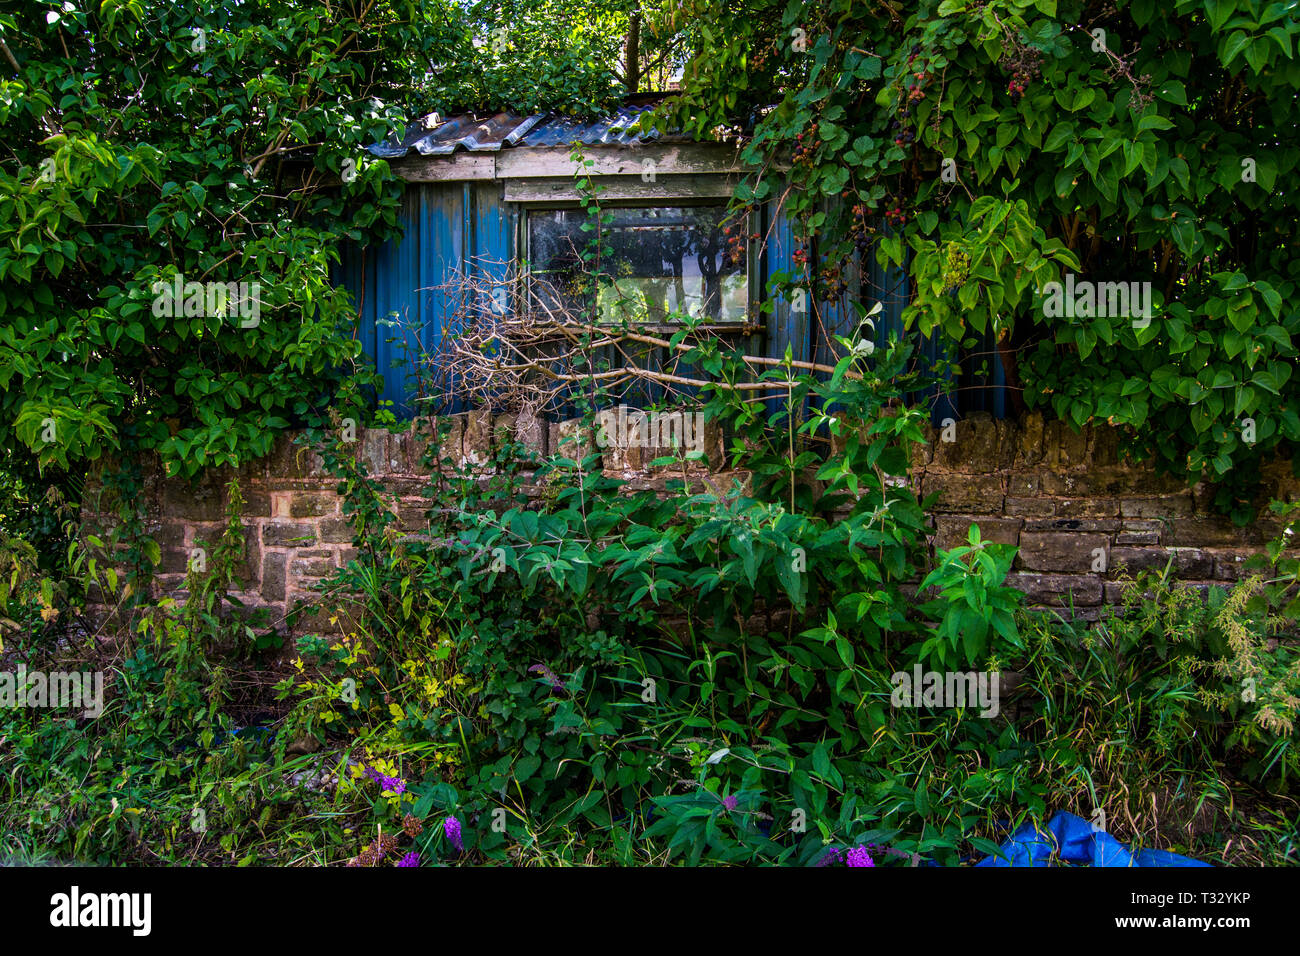 old abandoned shed in overgrown greenery Stock Photo